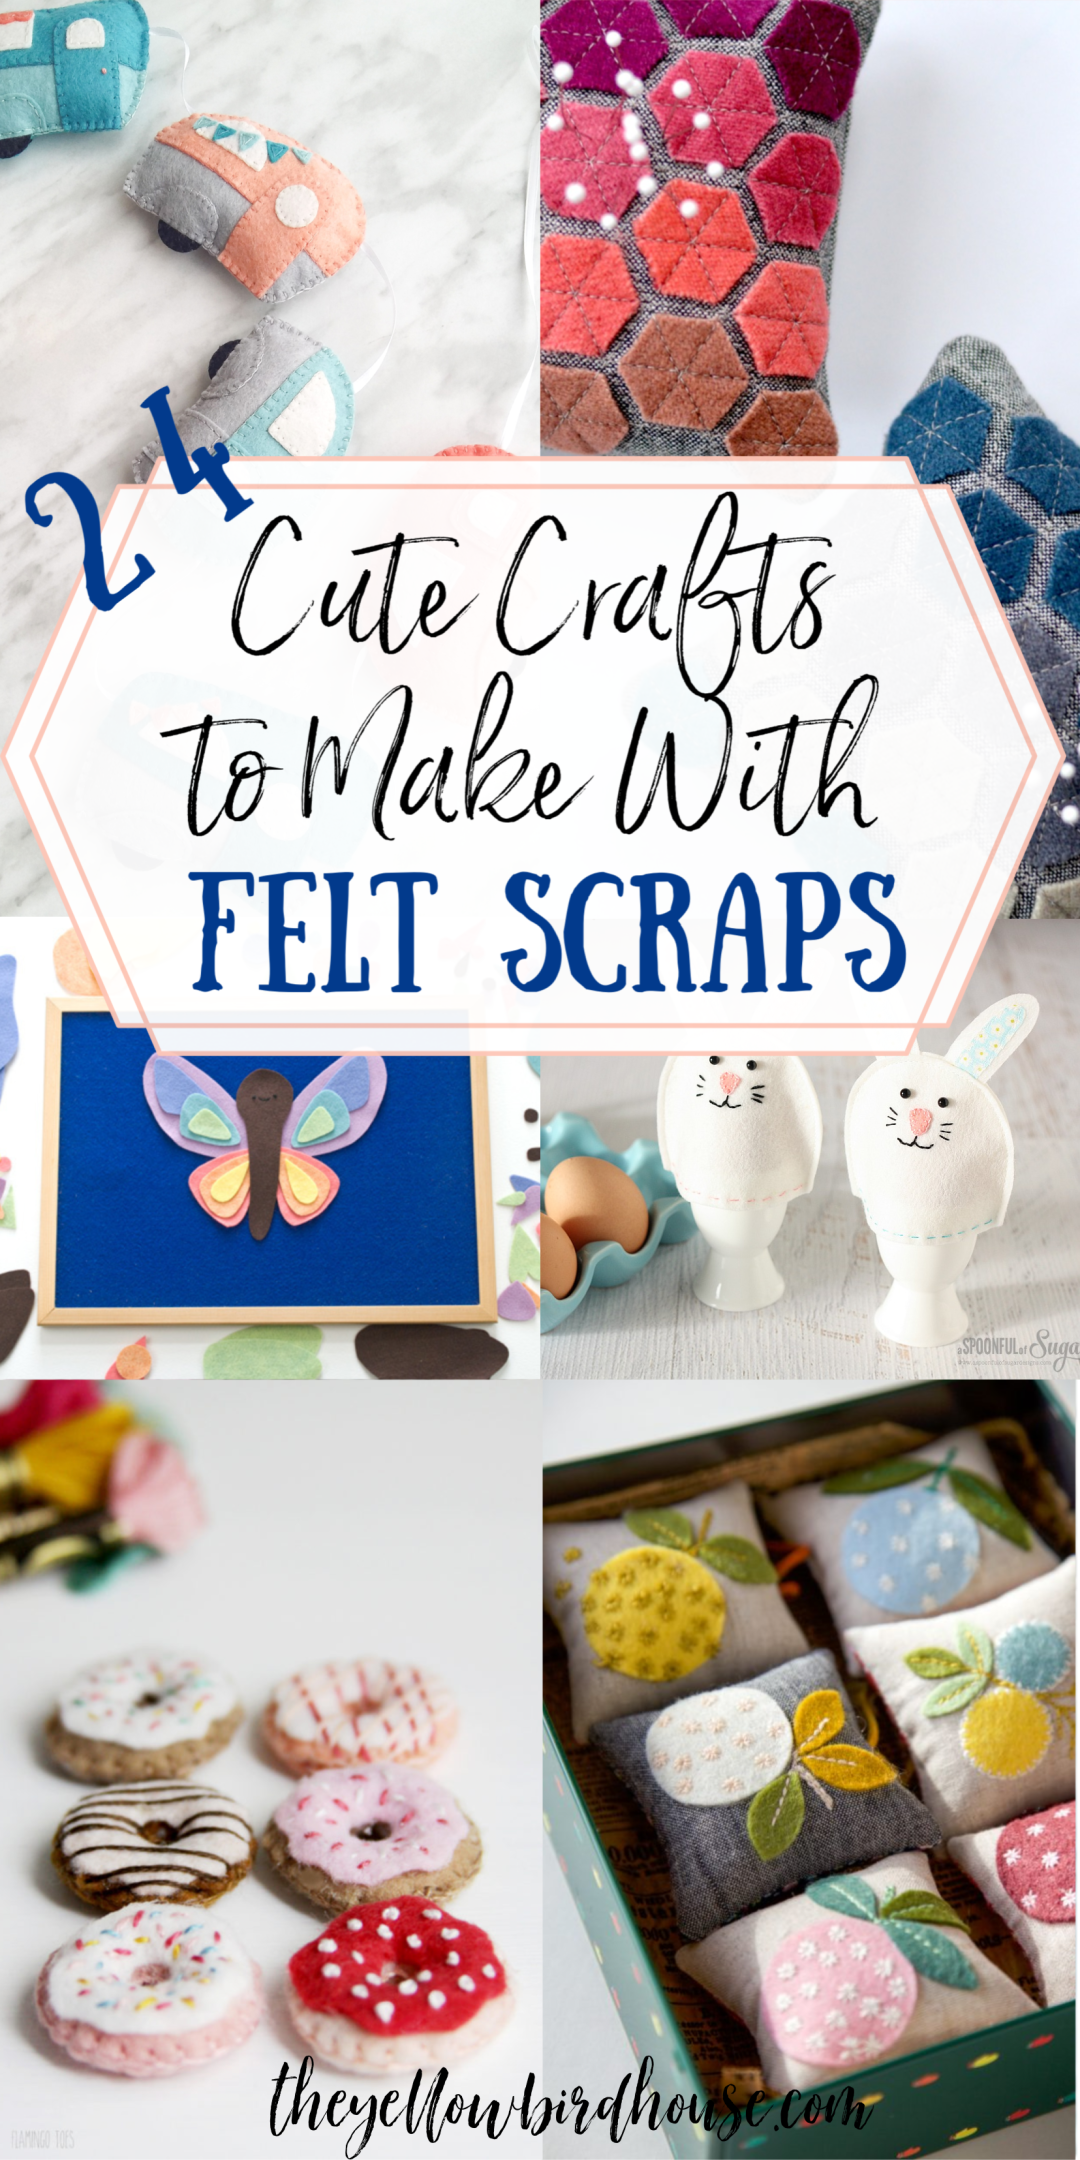 24+ Cute Crafts to Make with Felt Scraps | The Yellow Birdhouse - 24+ Cute Crafts to Make with Felt Scraps | The Yellow Birdhouse -   19 fabric crafts to sell ideas